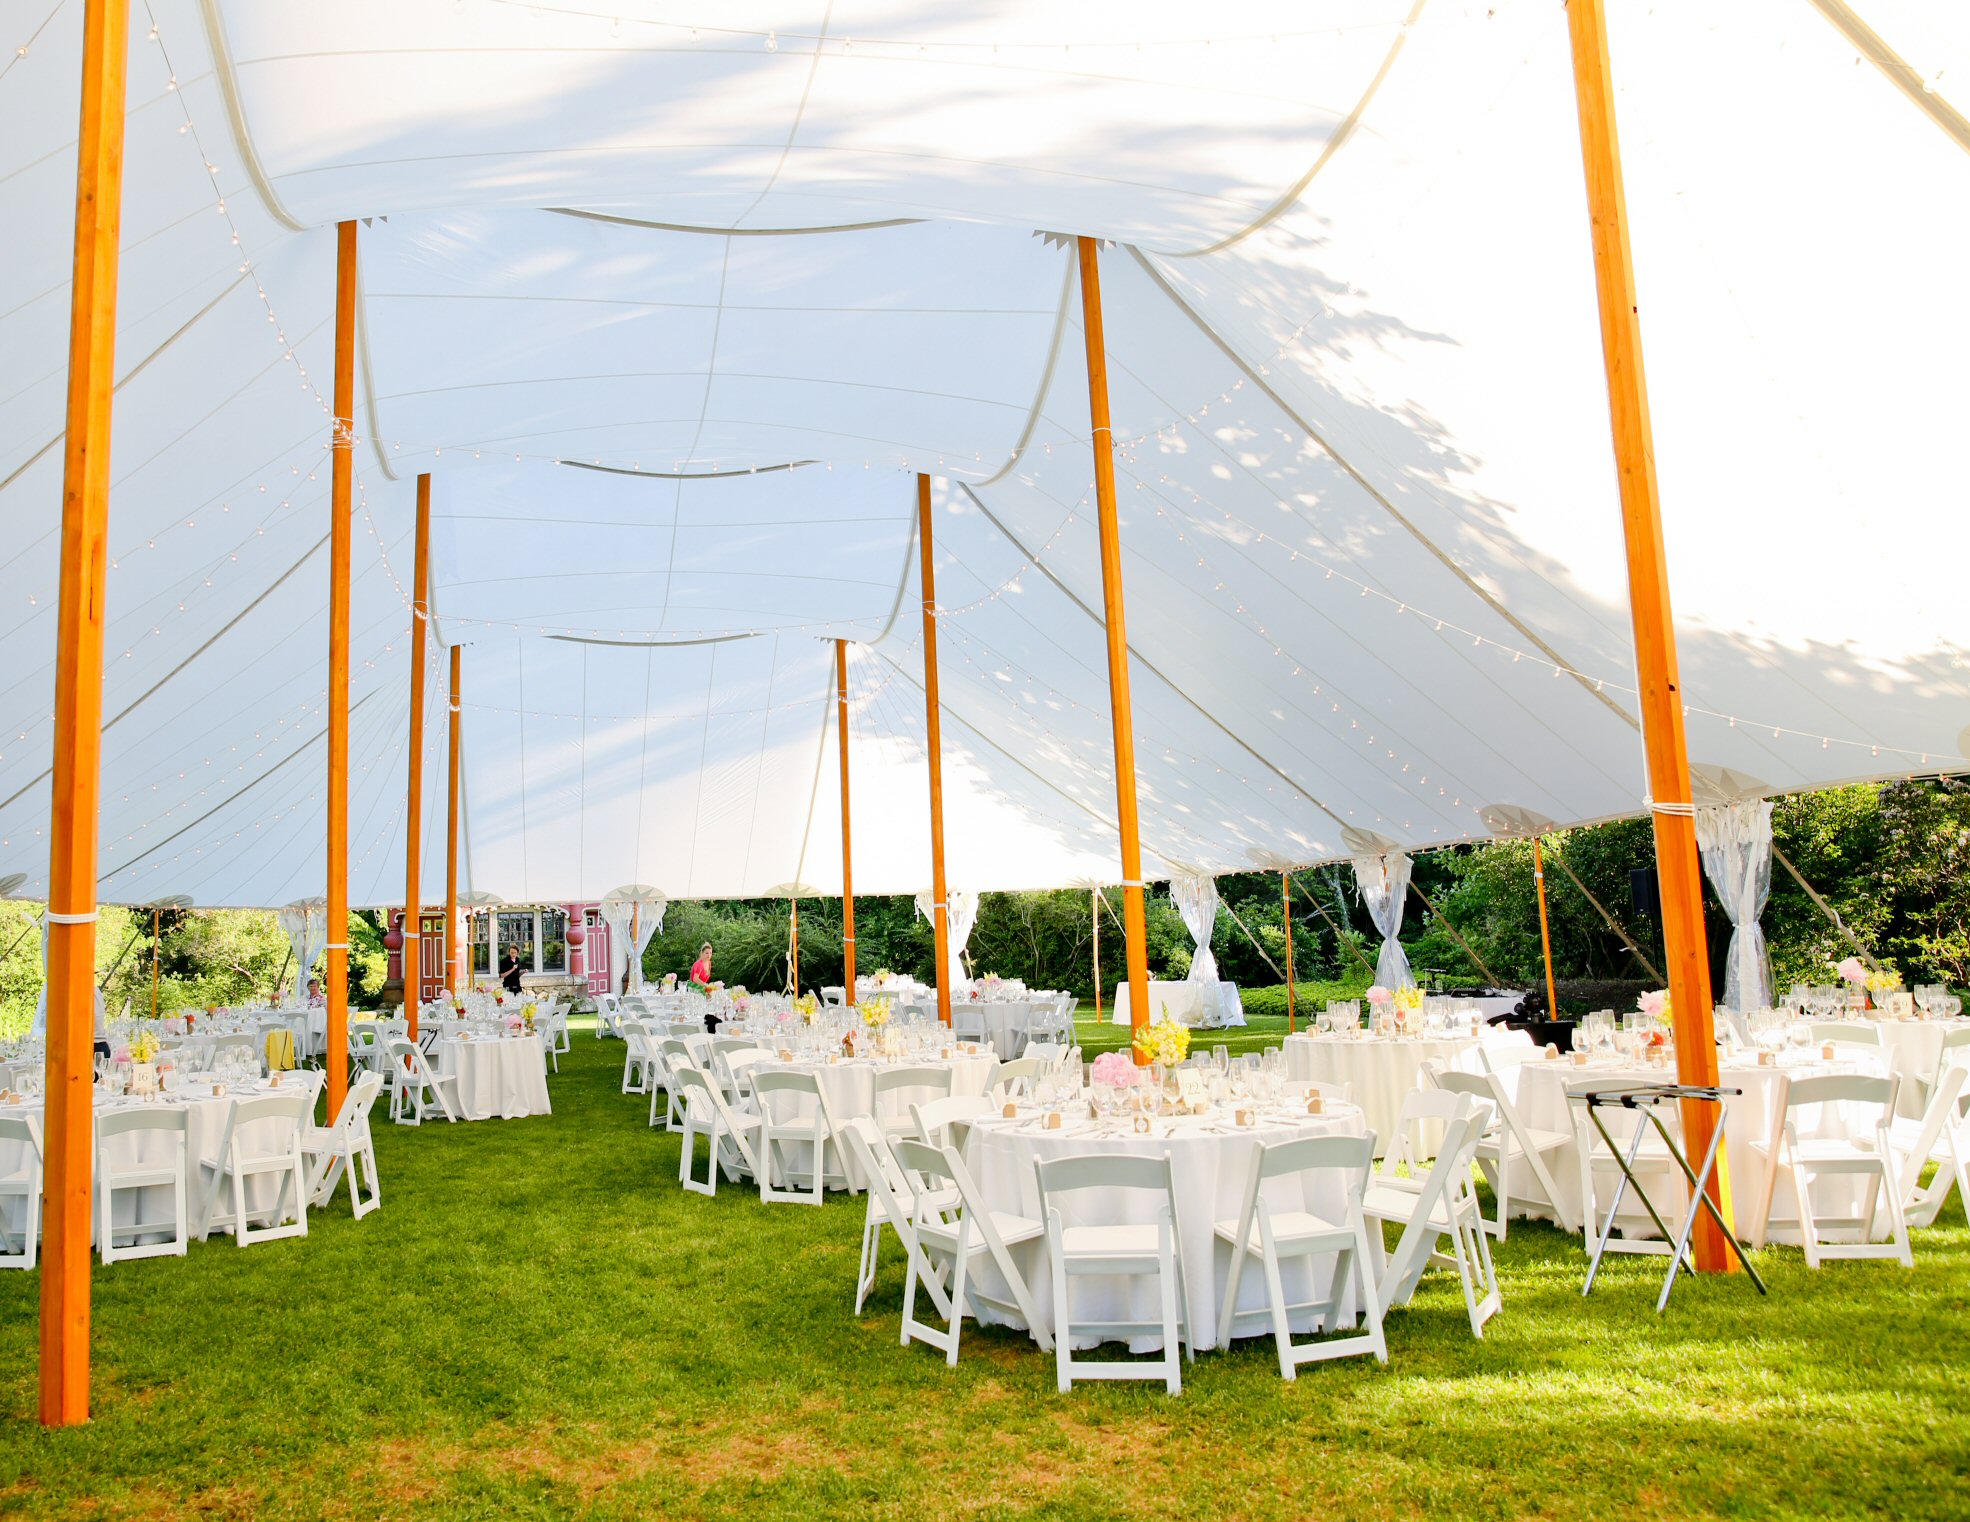 White Garden Chairs in a Tidewater Sailcloth Tent